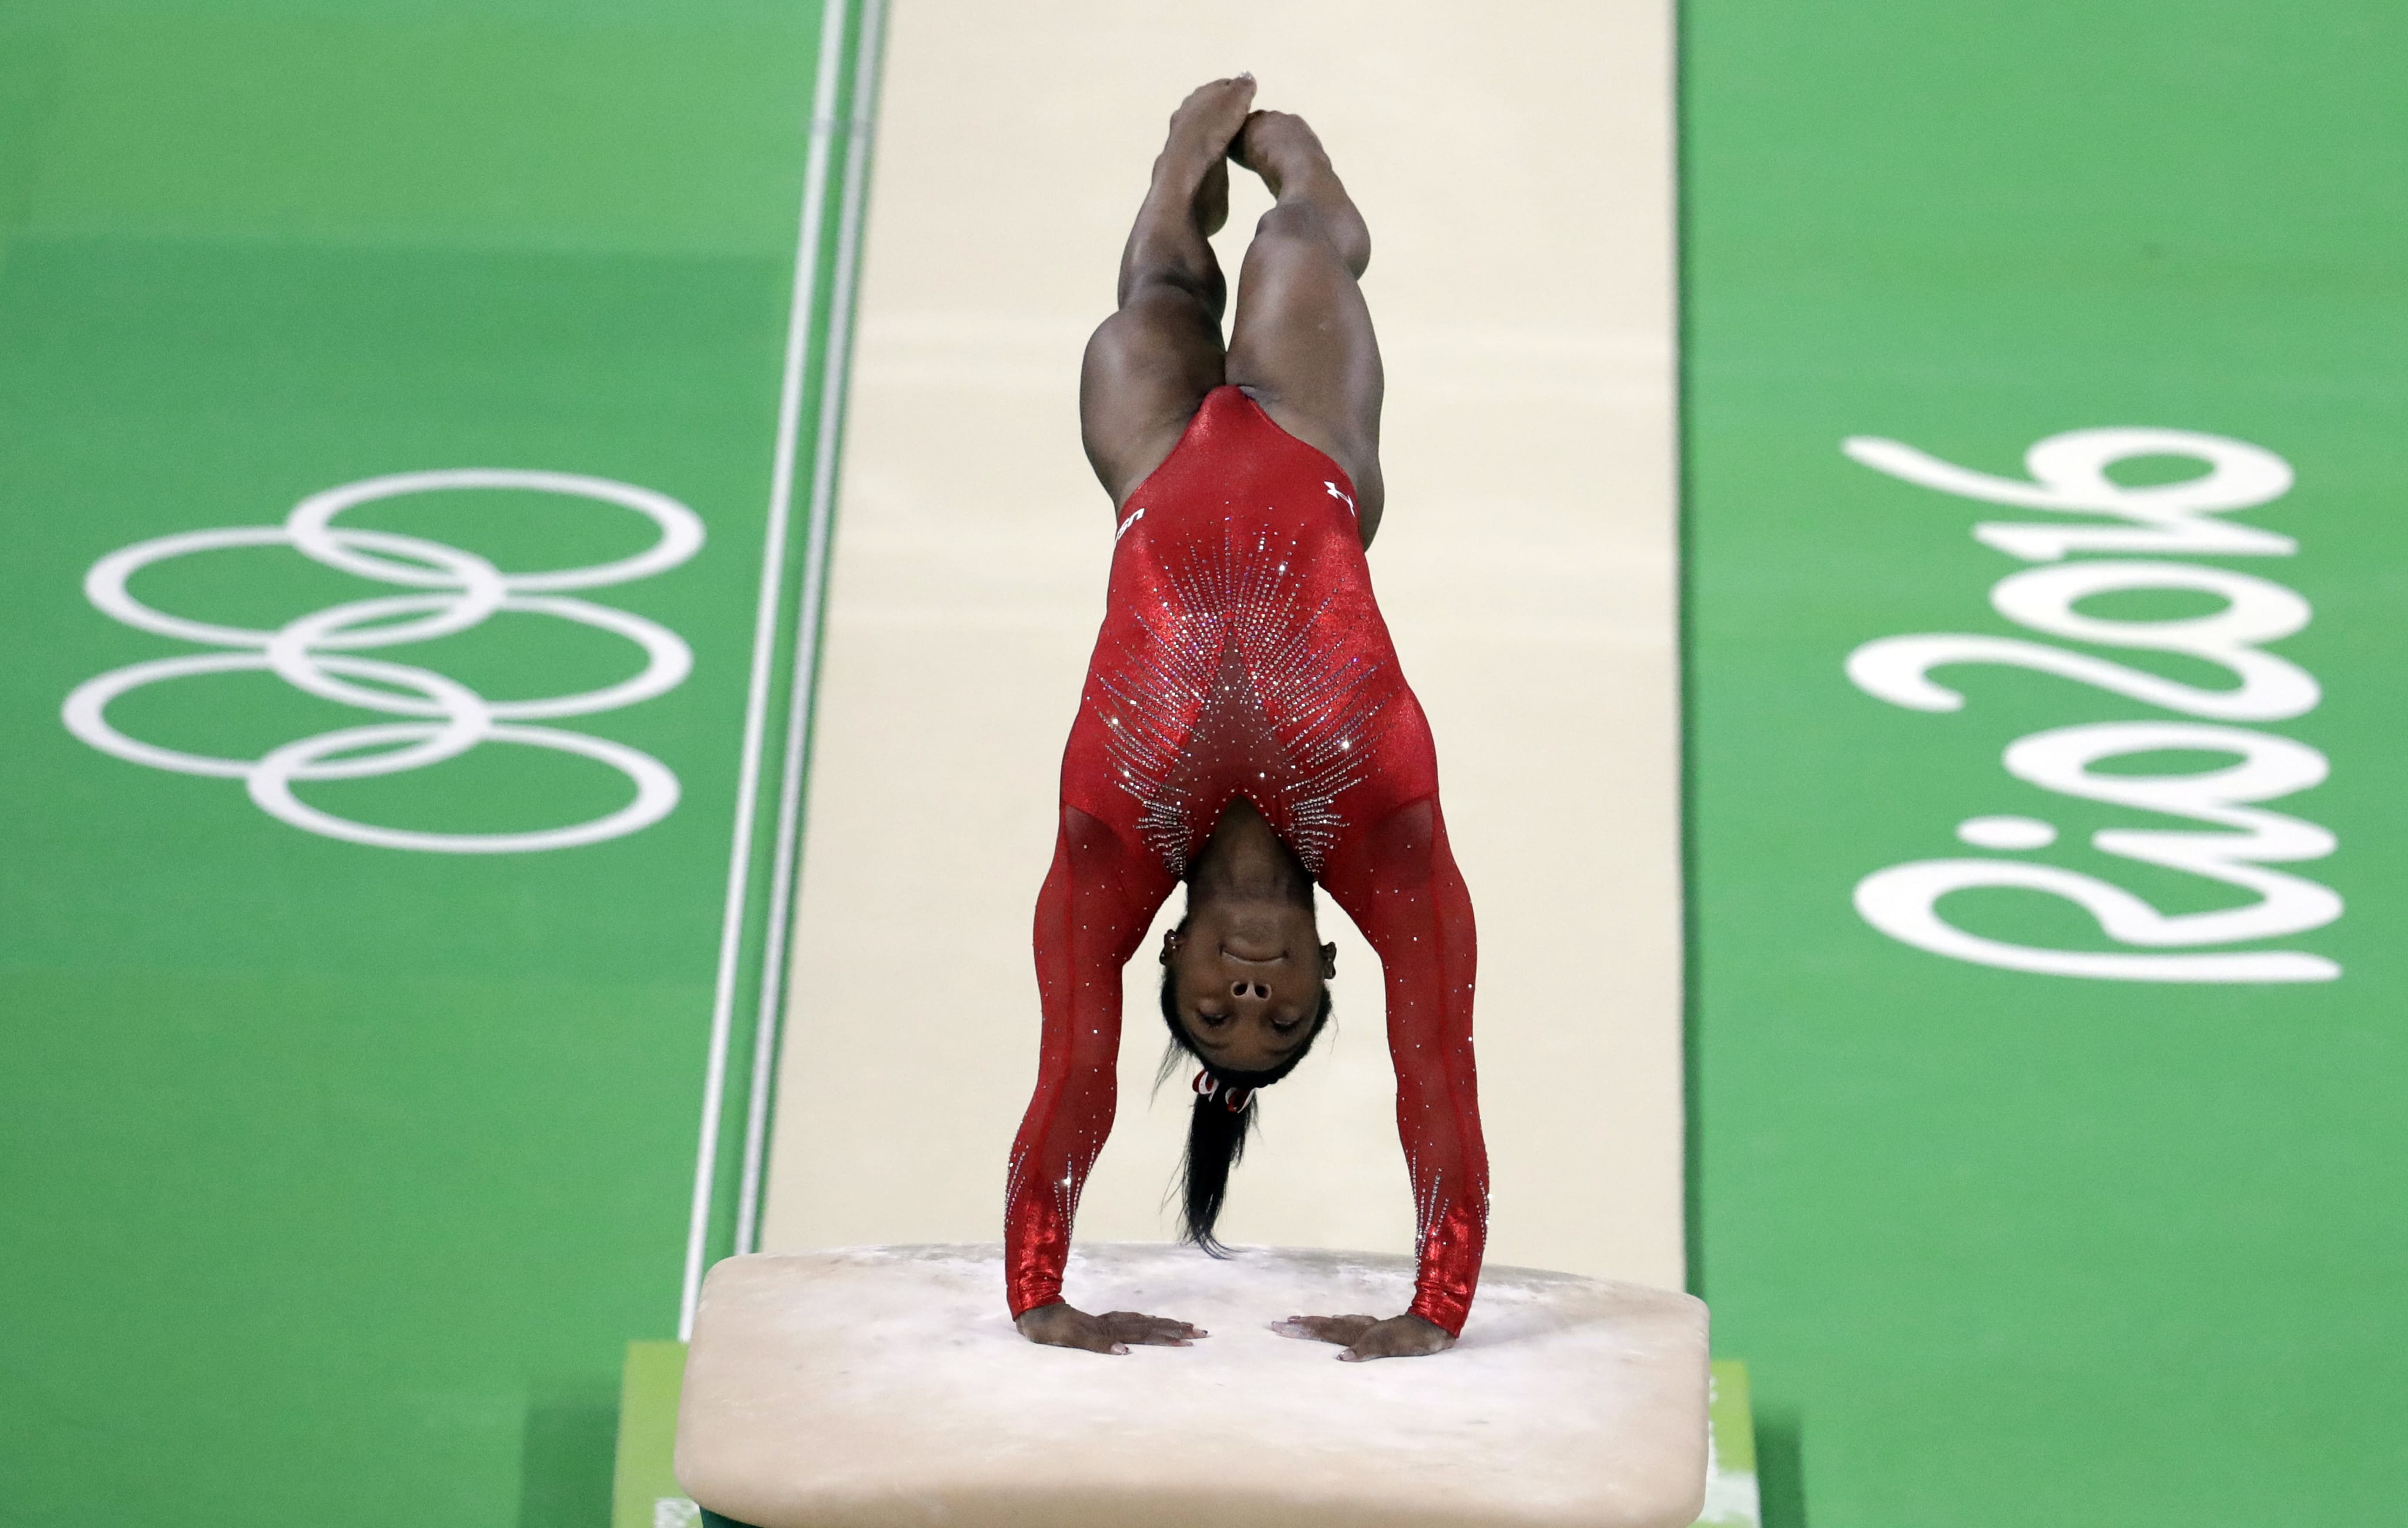 United States' Simone Biles performs on the vault during the artistic gymnastics women's apparatus final at the 2016 Summer Olympics in Rio de Janeiro, Brazil, Sunday, Aug. 14, 2016.